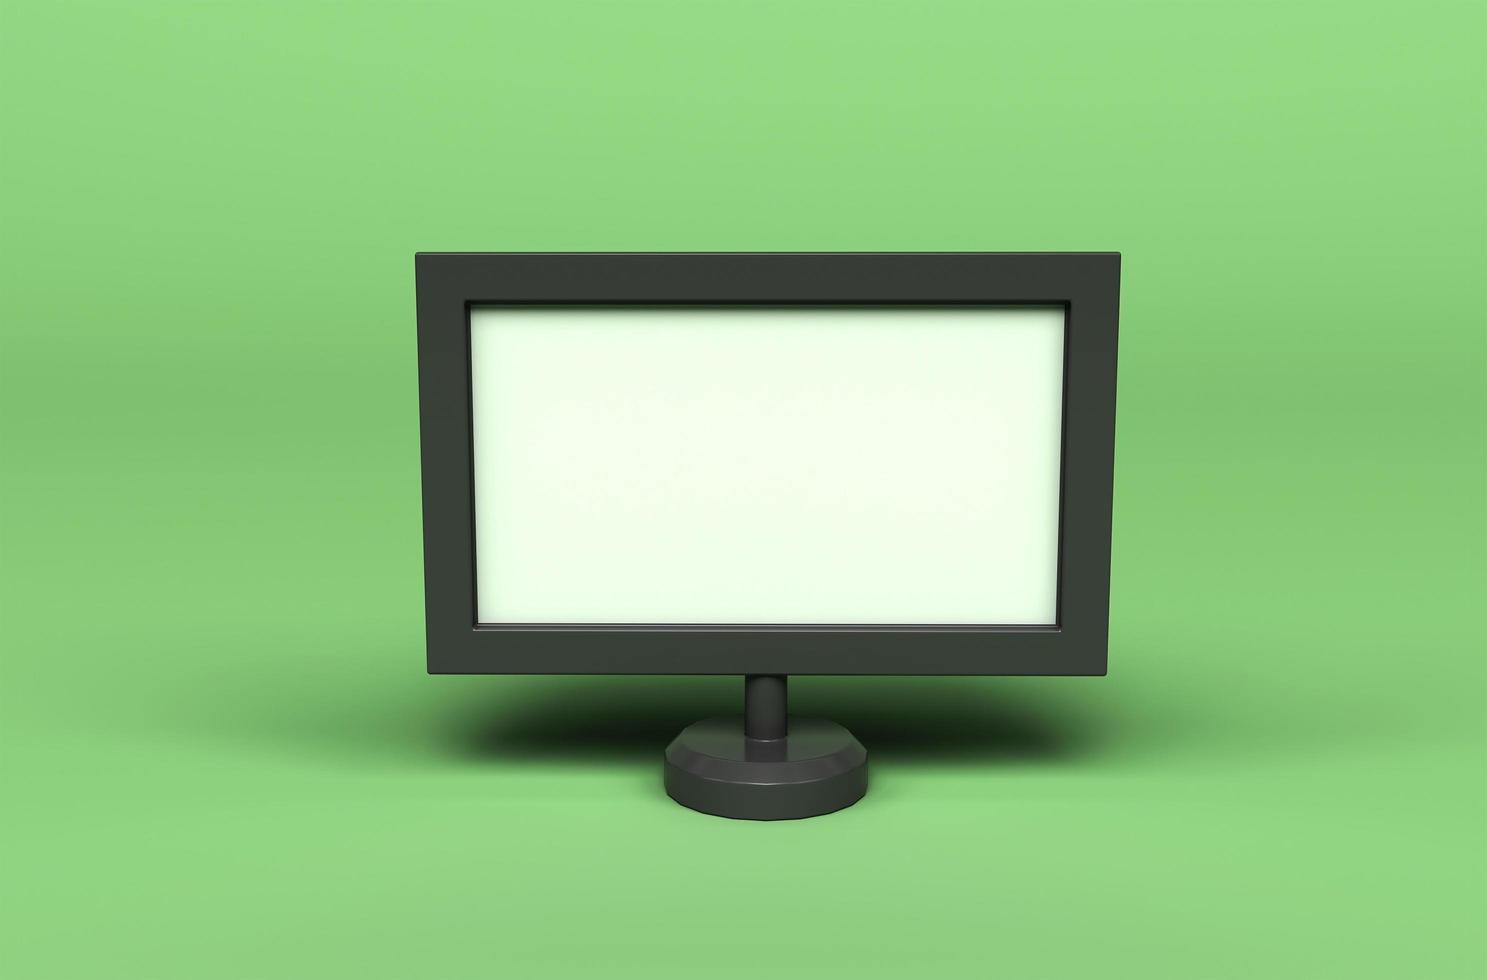 computer monitor display 3d illustration on white background. photo